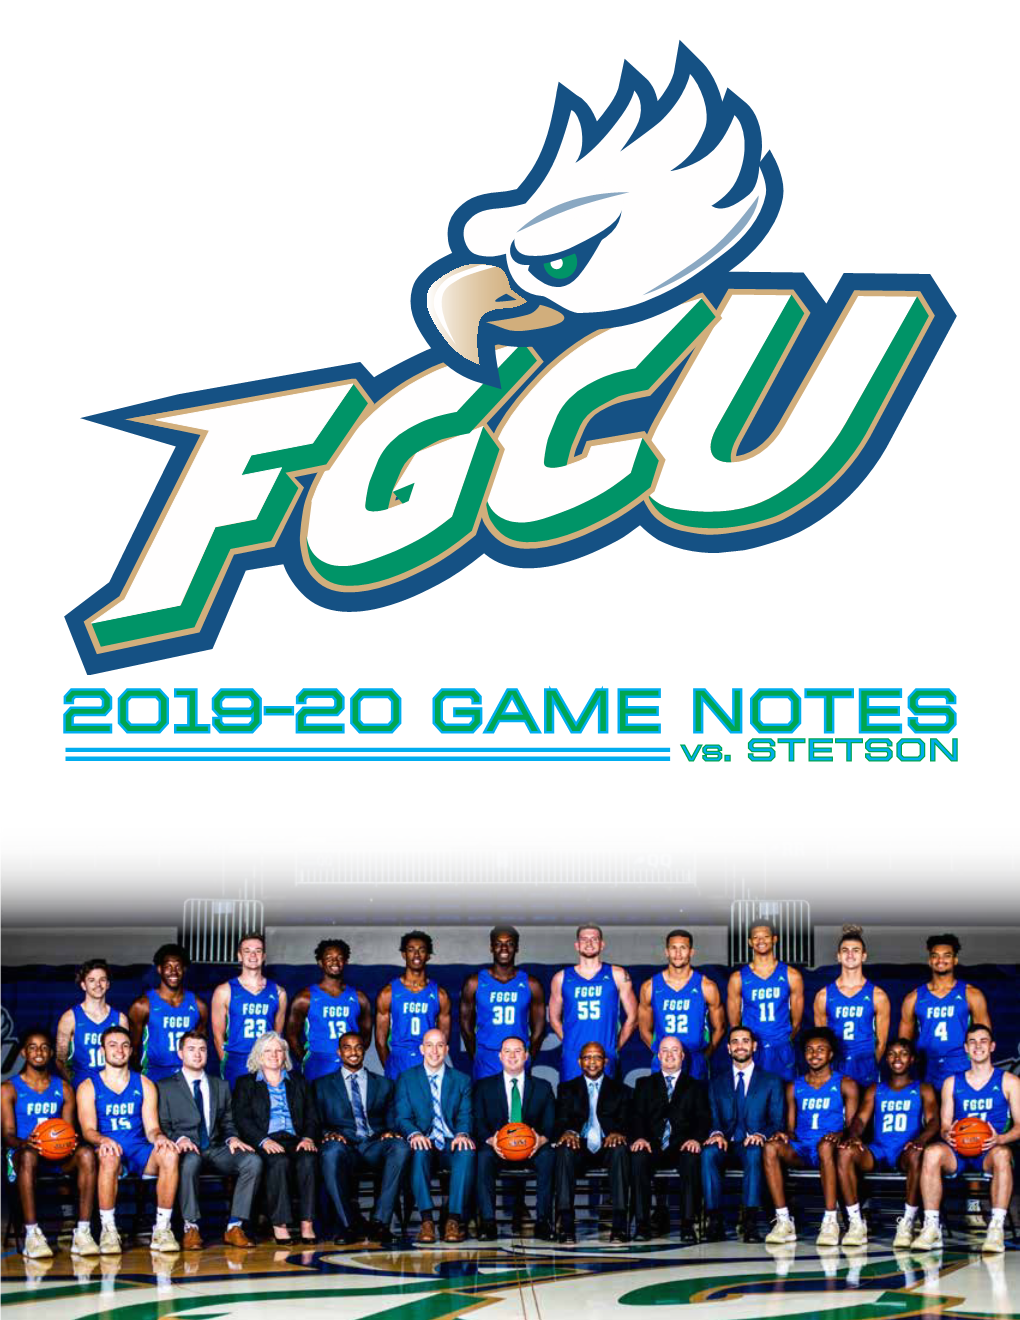 2019-20 GAME NOTES Vs